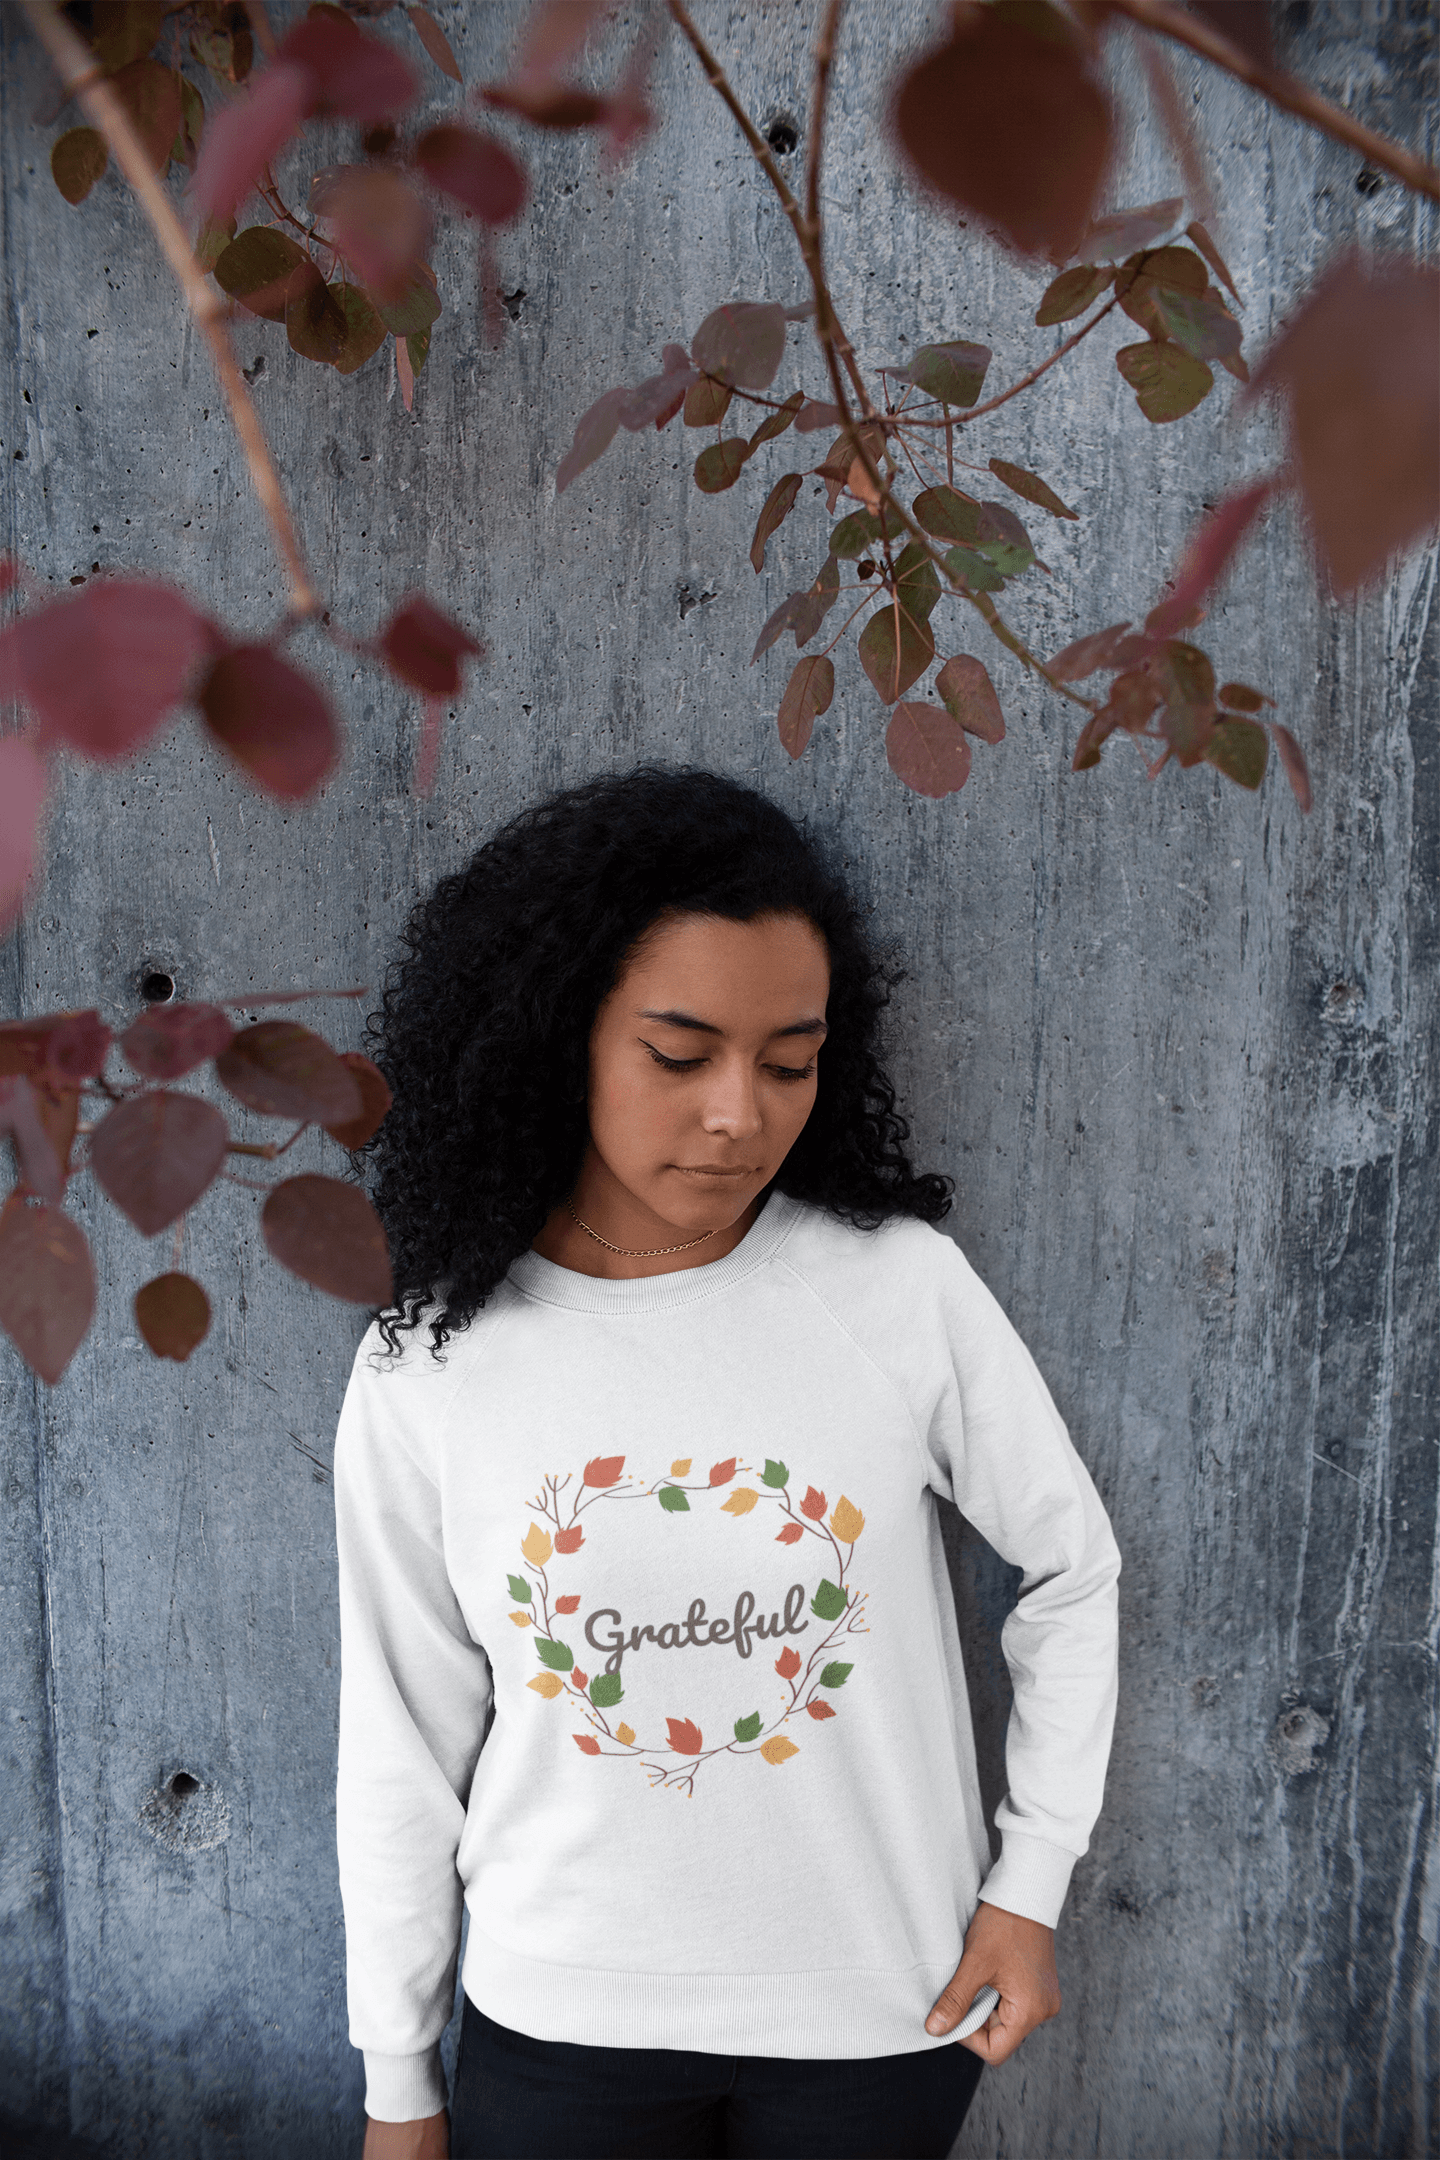 Grateful Sweatshirt - Sharp Tact Kreativ | Tees & Gifts with Encouraging Messages to Brighten Your Day with a Bit of Wit